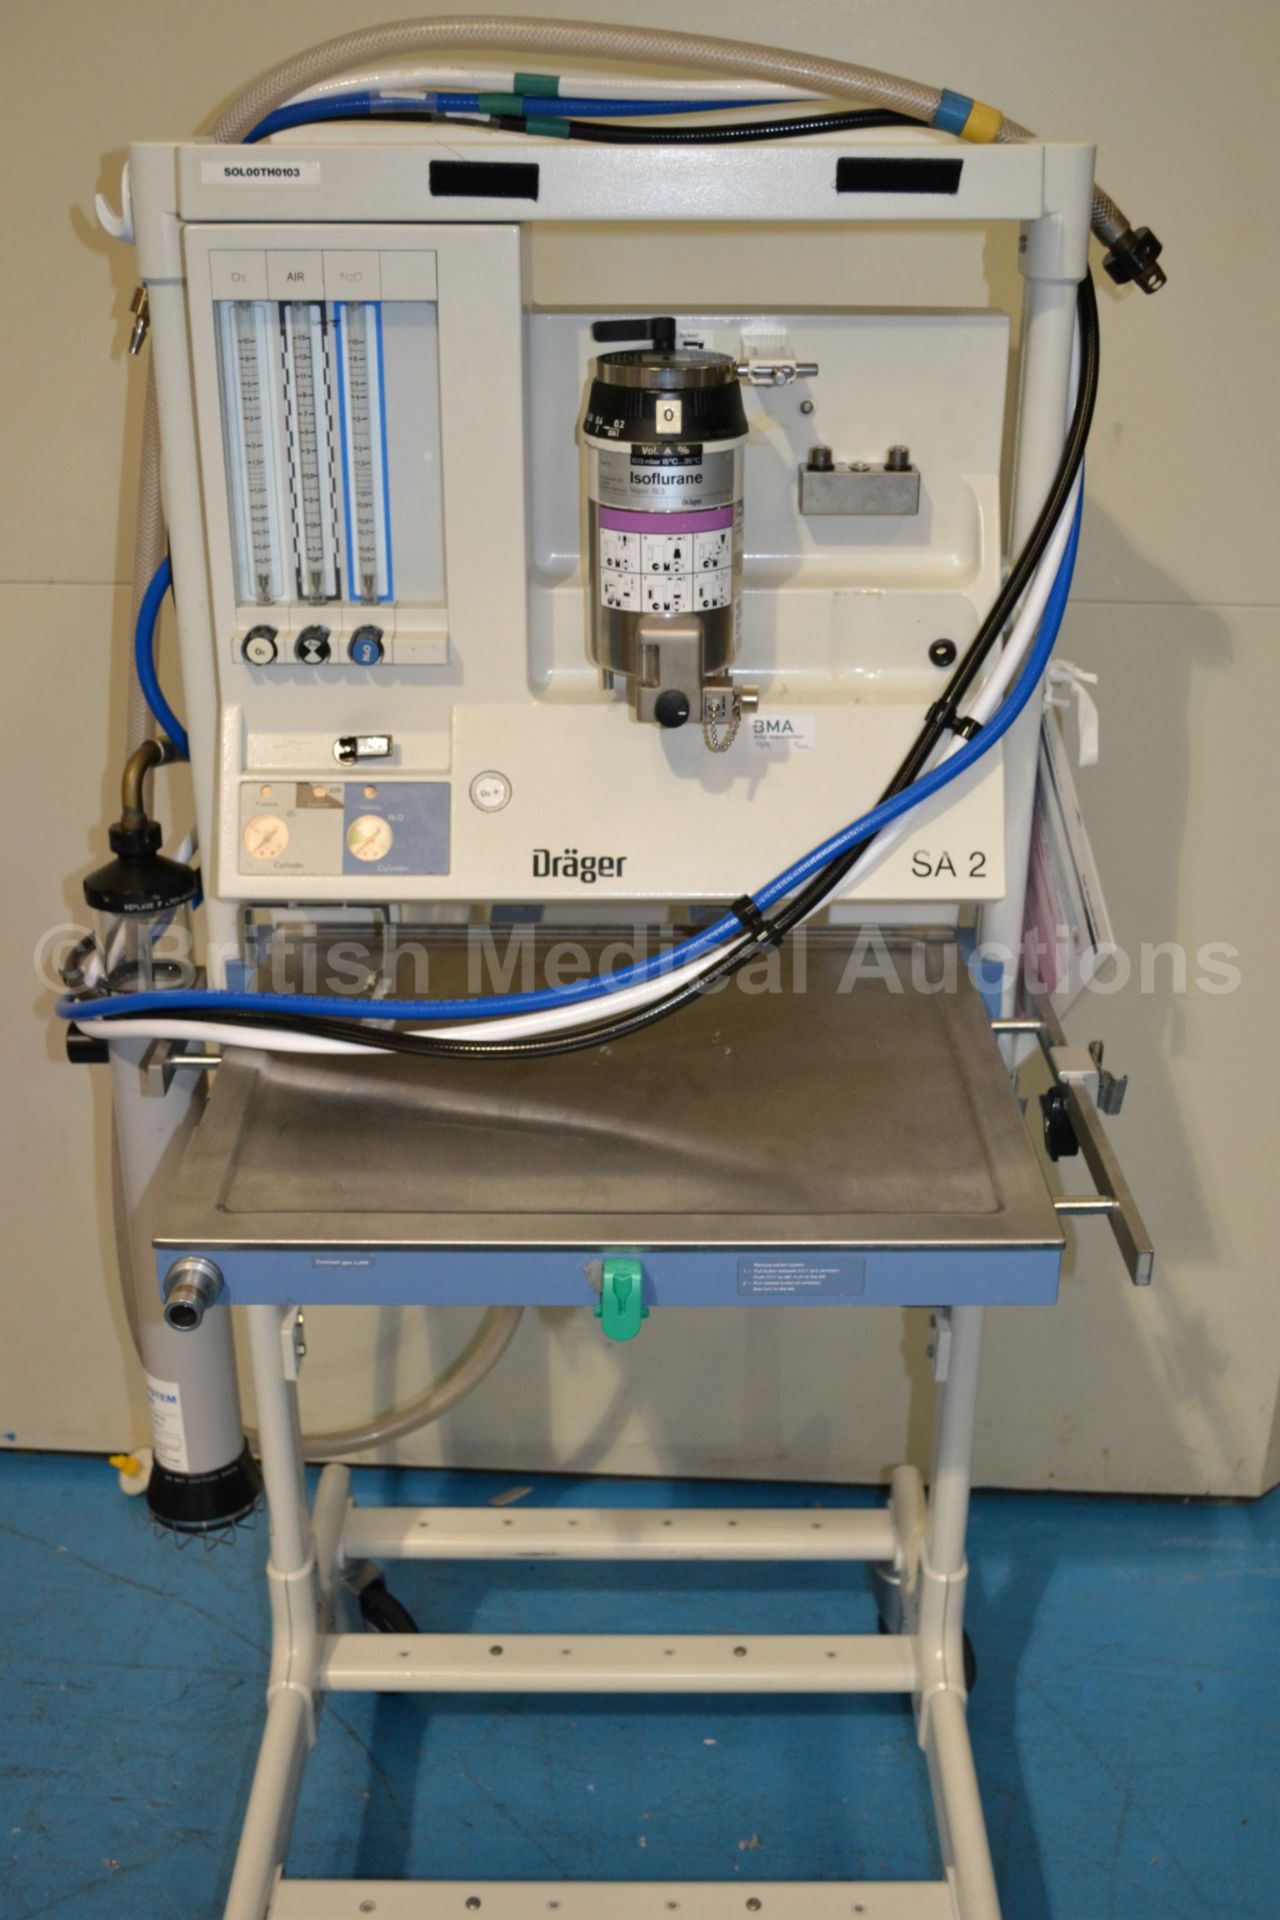 Drager SA 2 Anaesthesia System with Drager Vapor 1